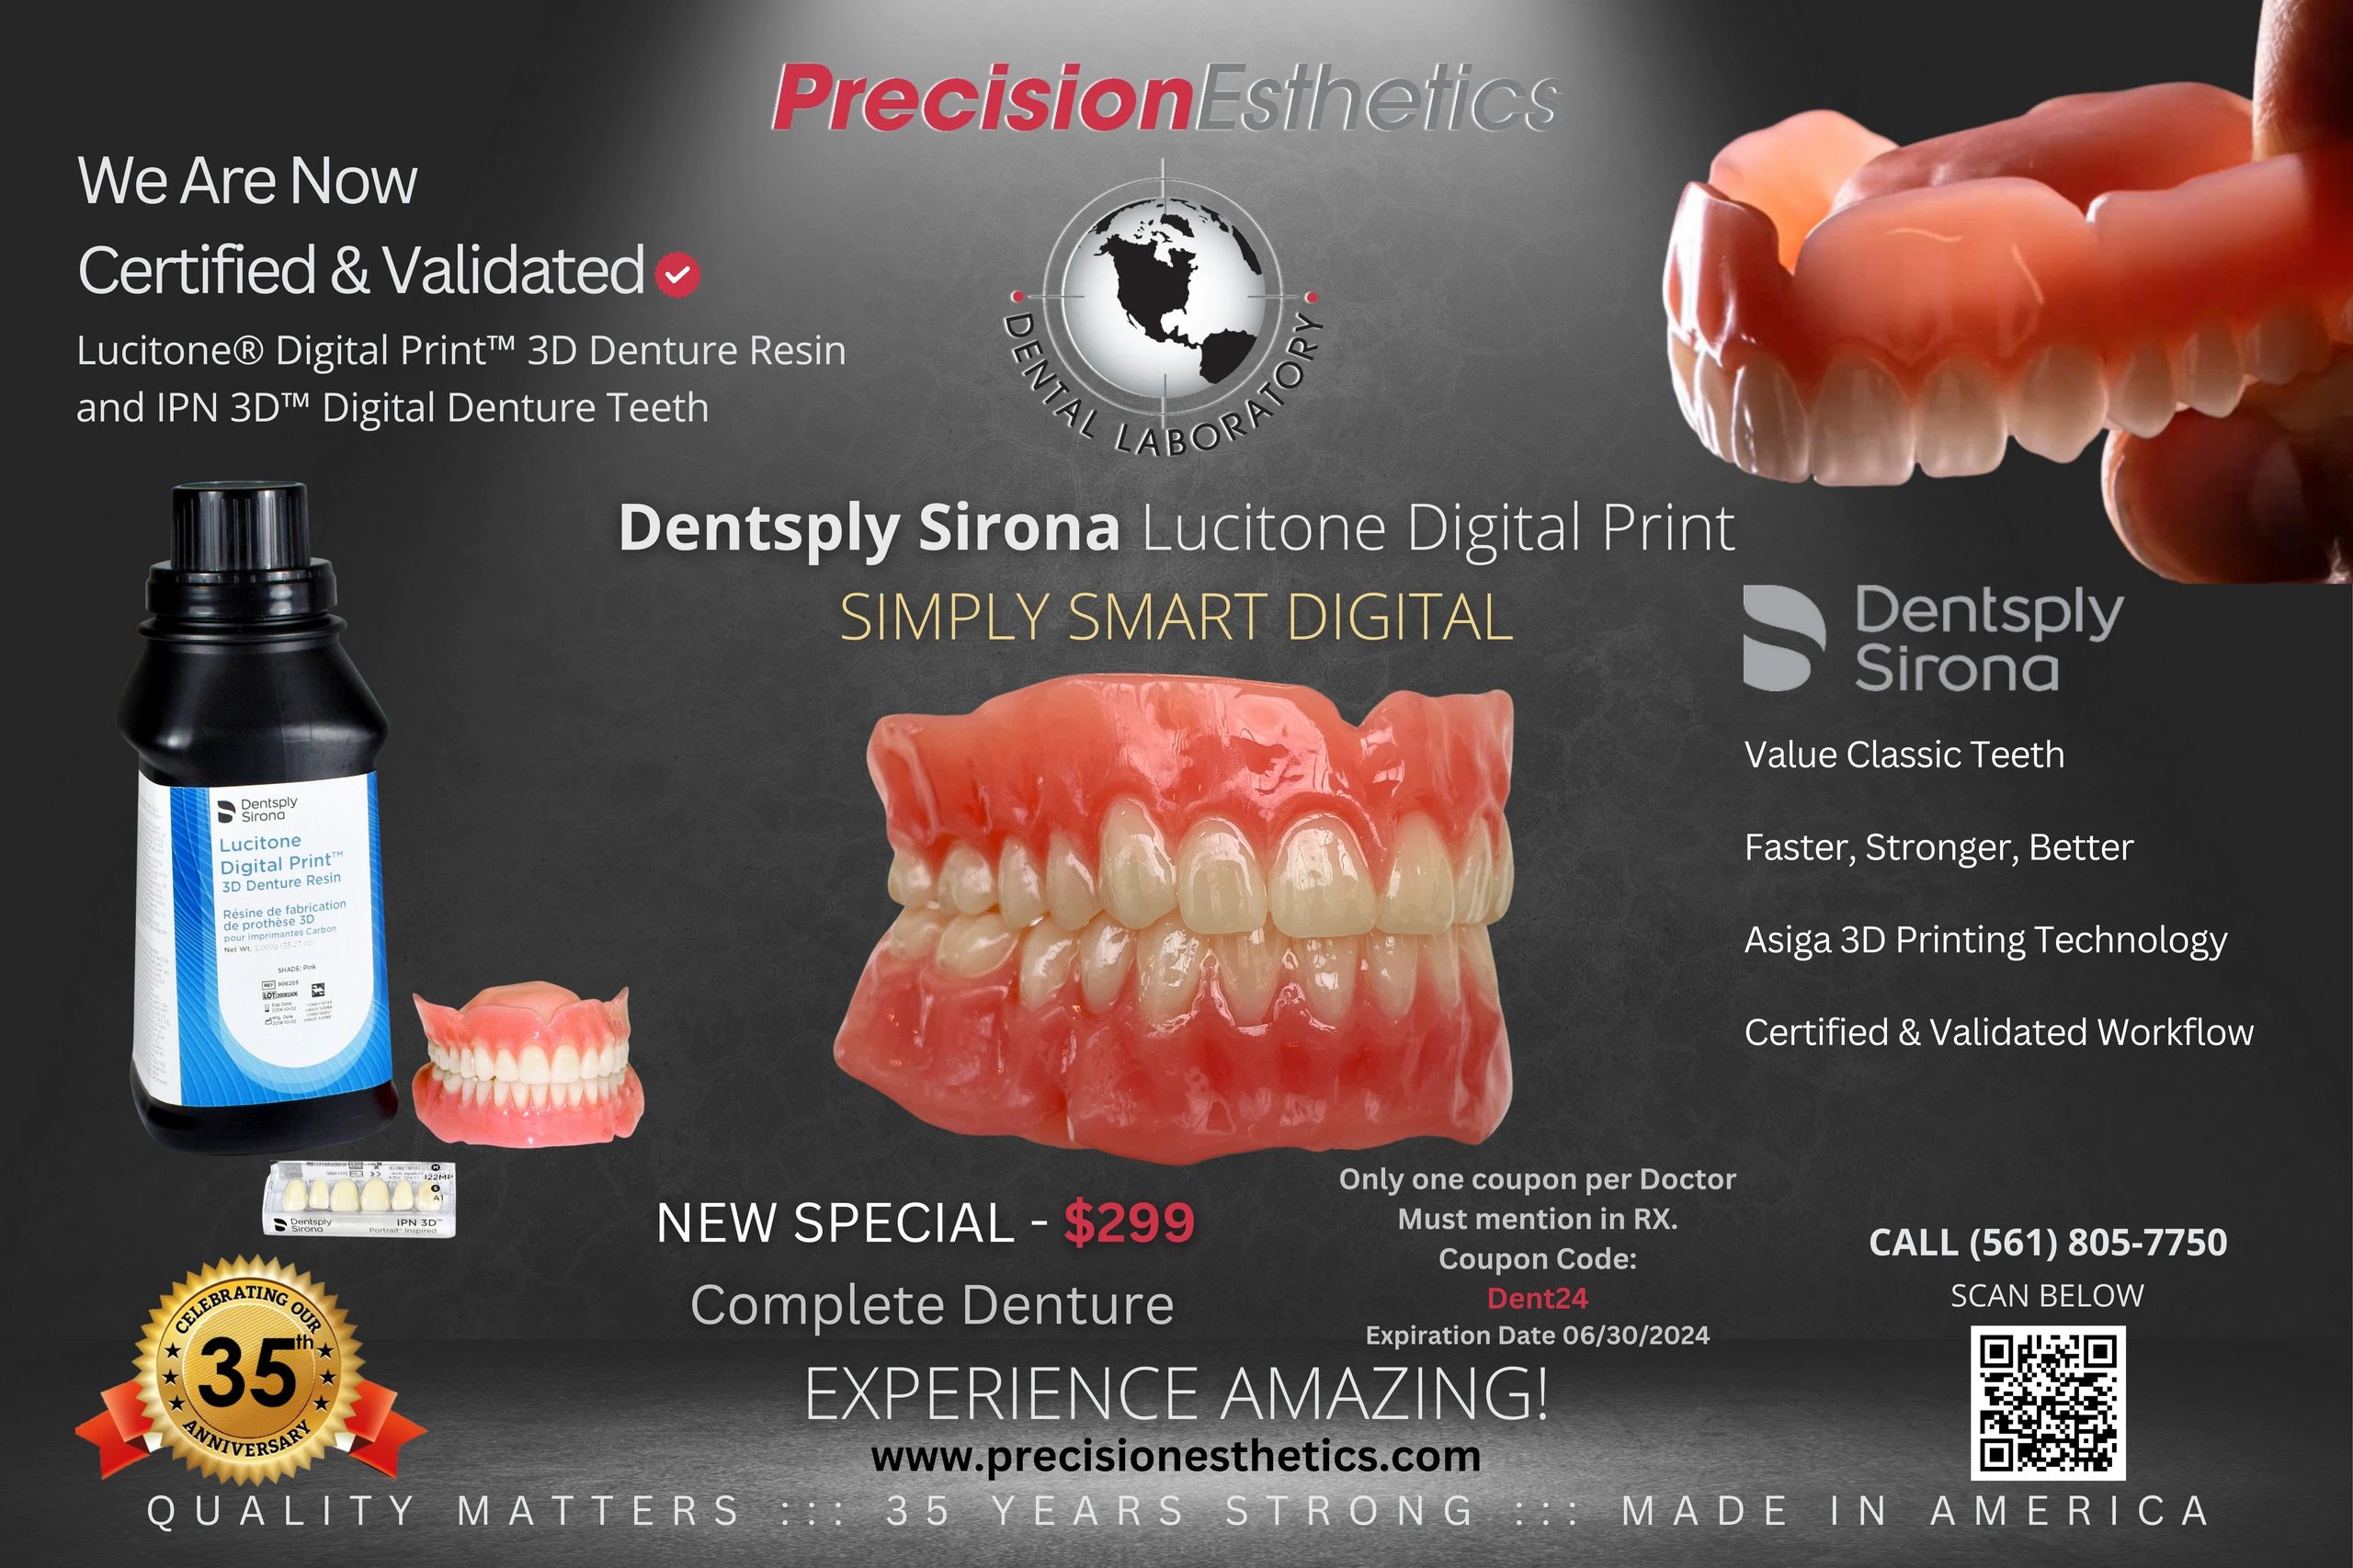 Lucitone Digital Print Denture Coupon from a dental laboratory